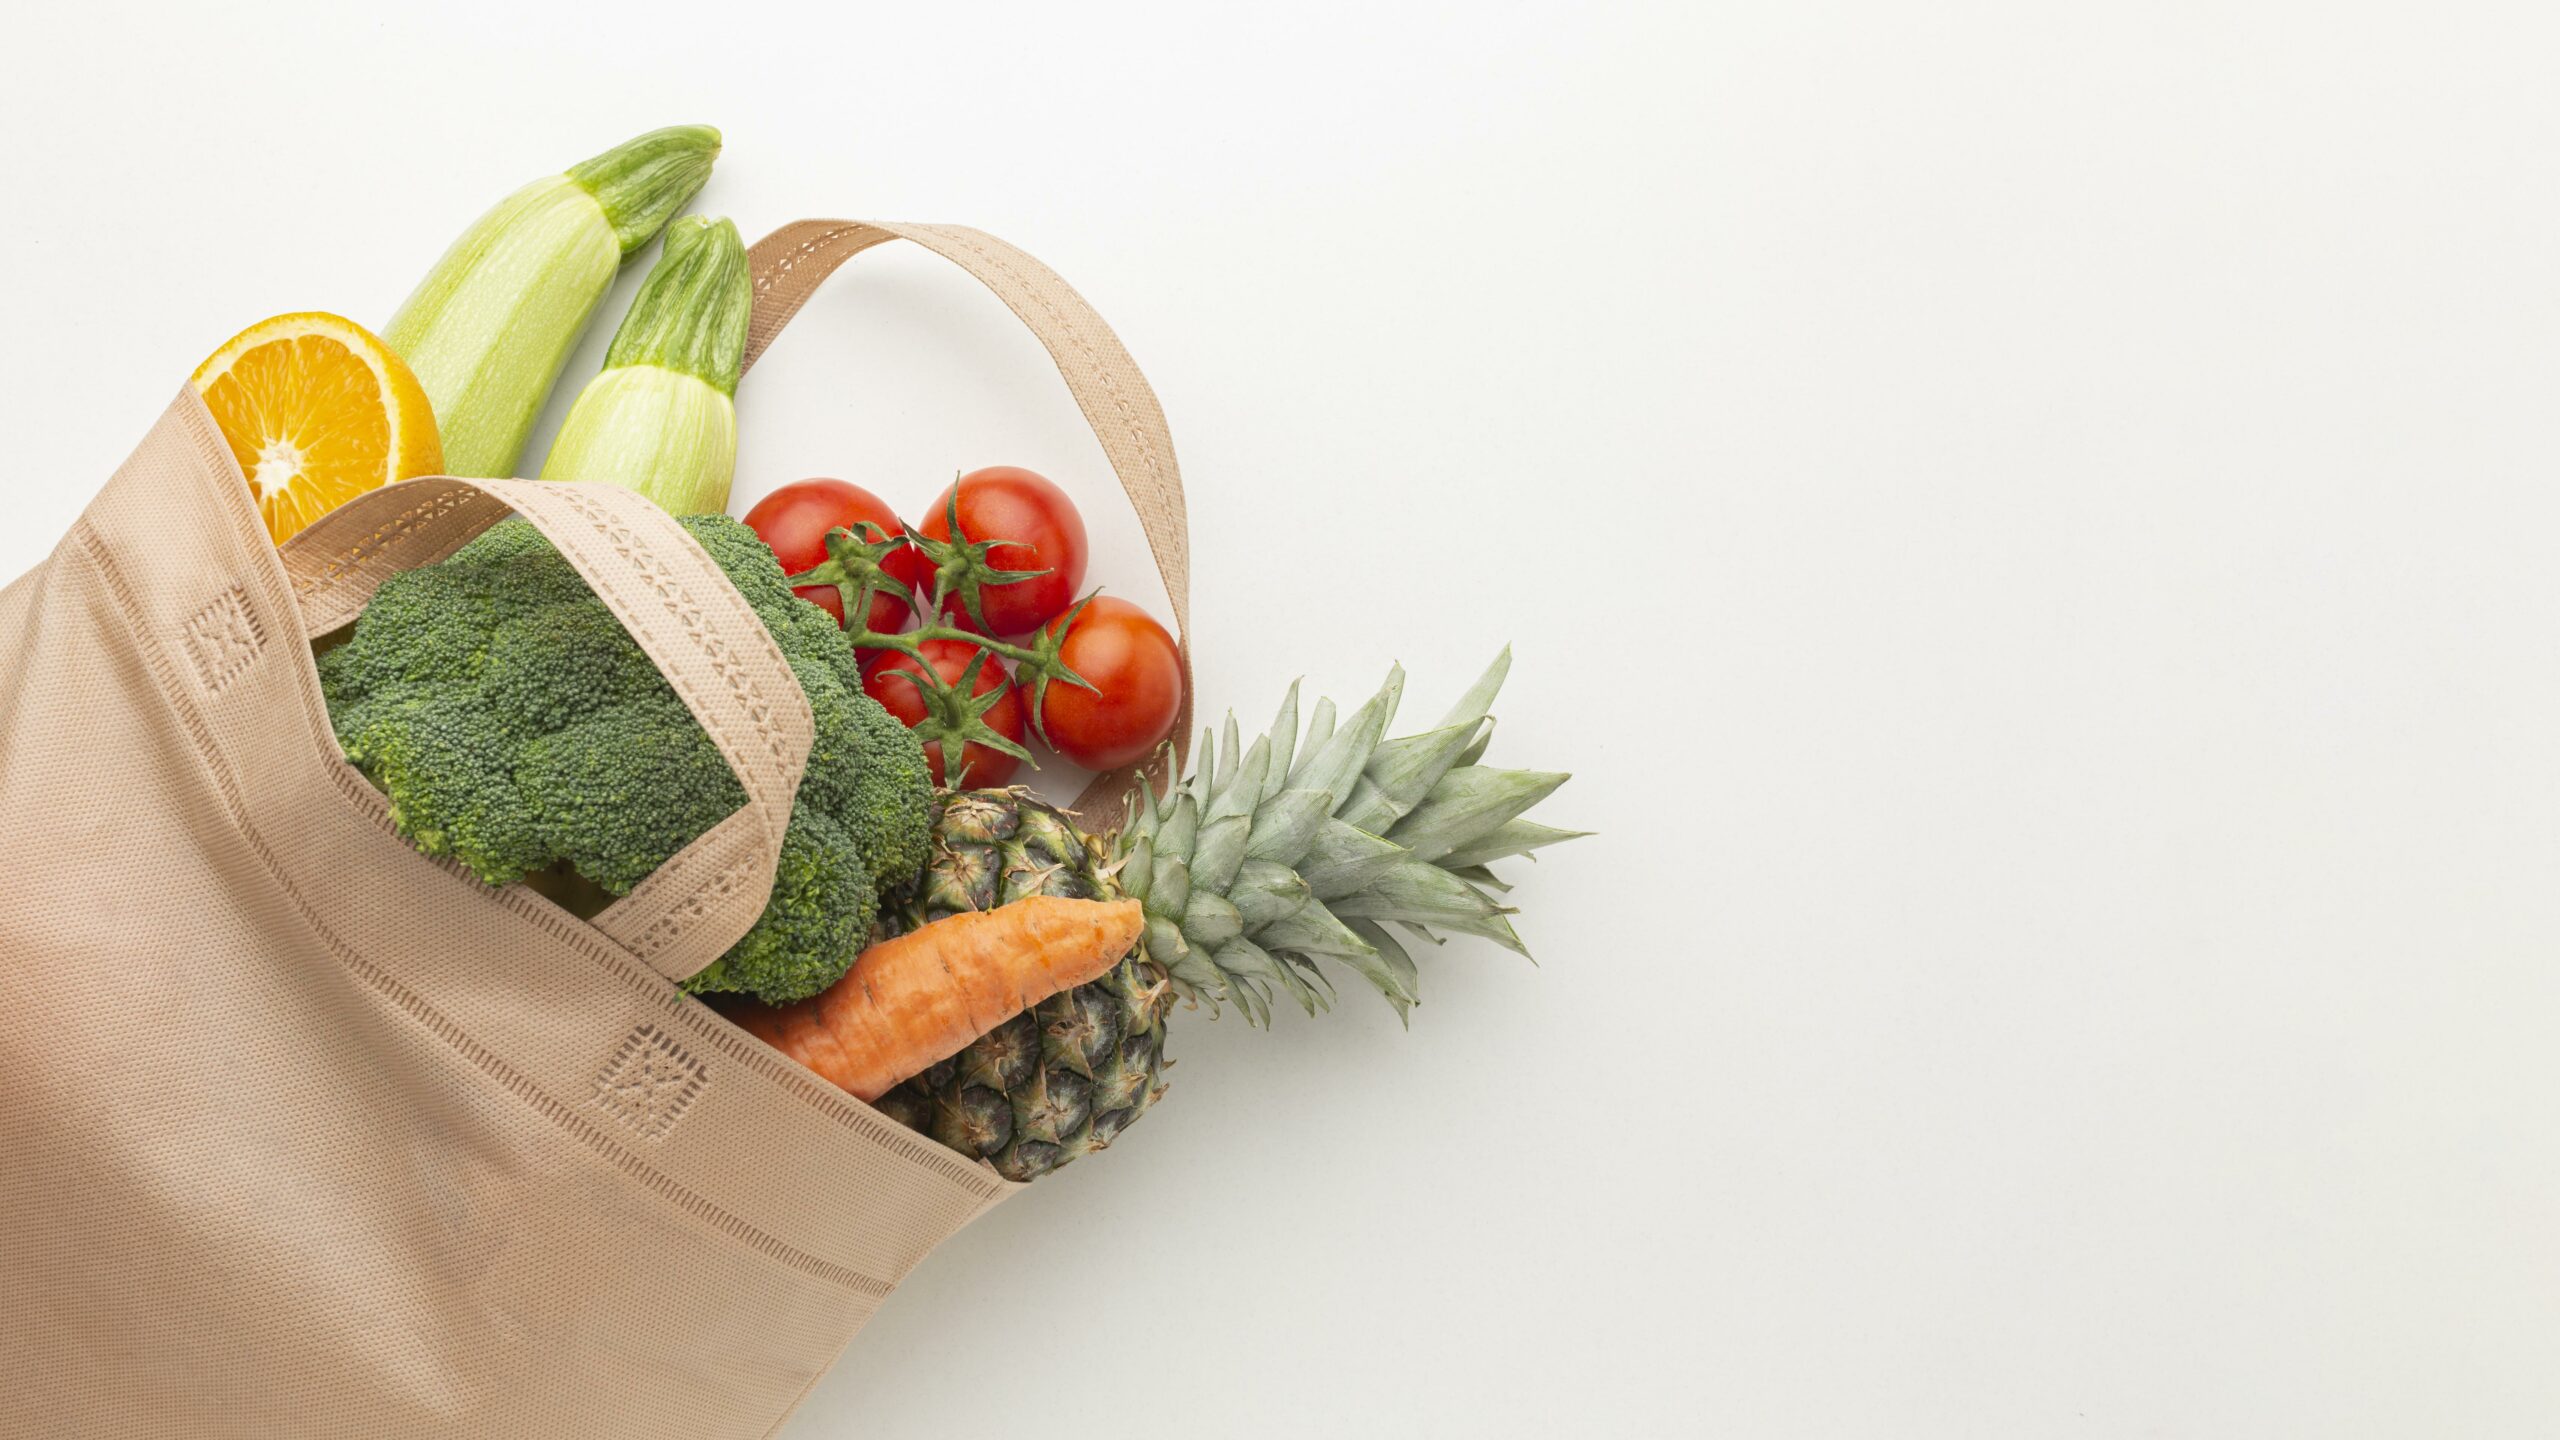 reusable bag from grocery stores, department stores and brands for circular economy